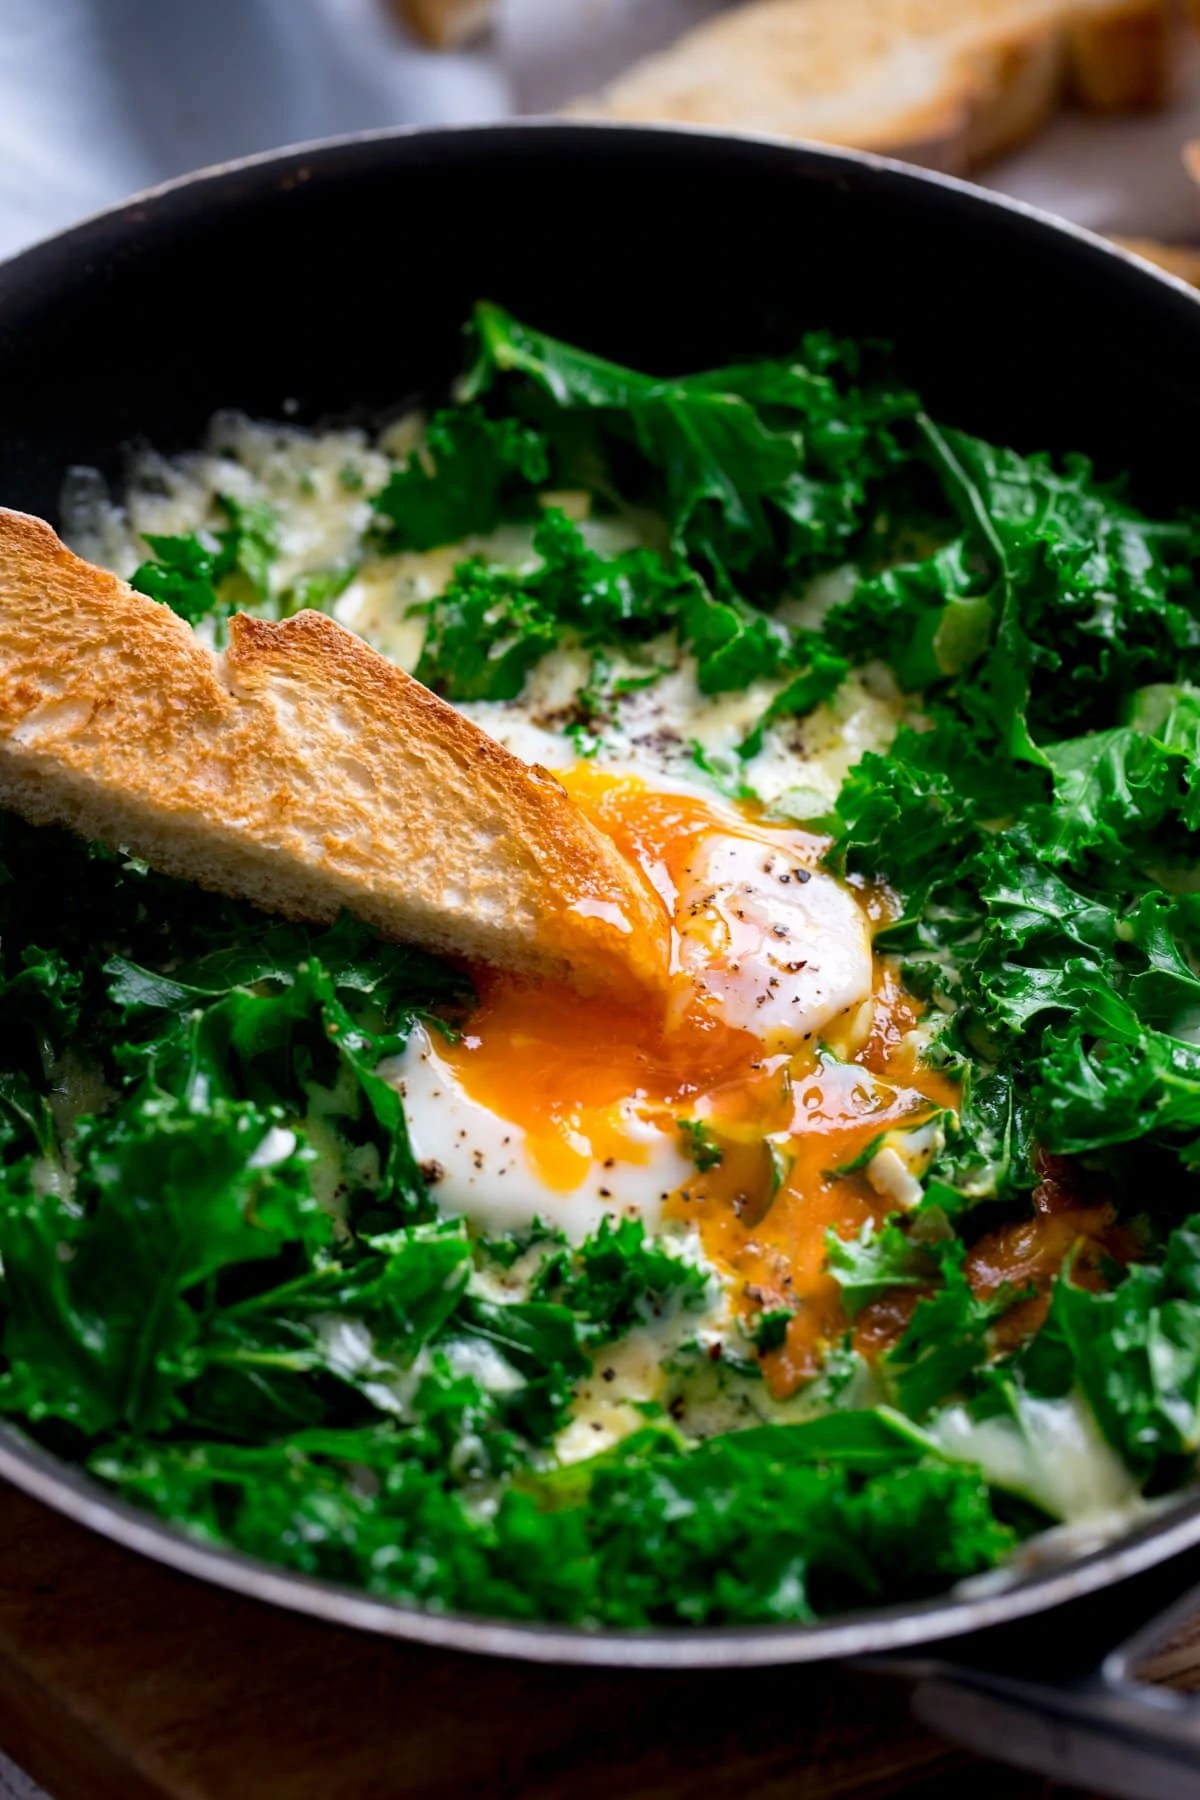 A toast soldier being dipped into the runny egg yolk in a pan of kale and fried egg.